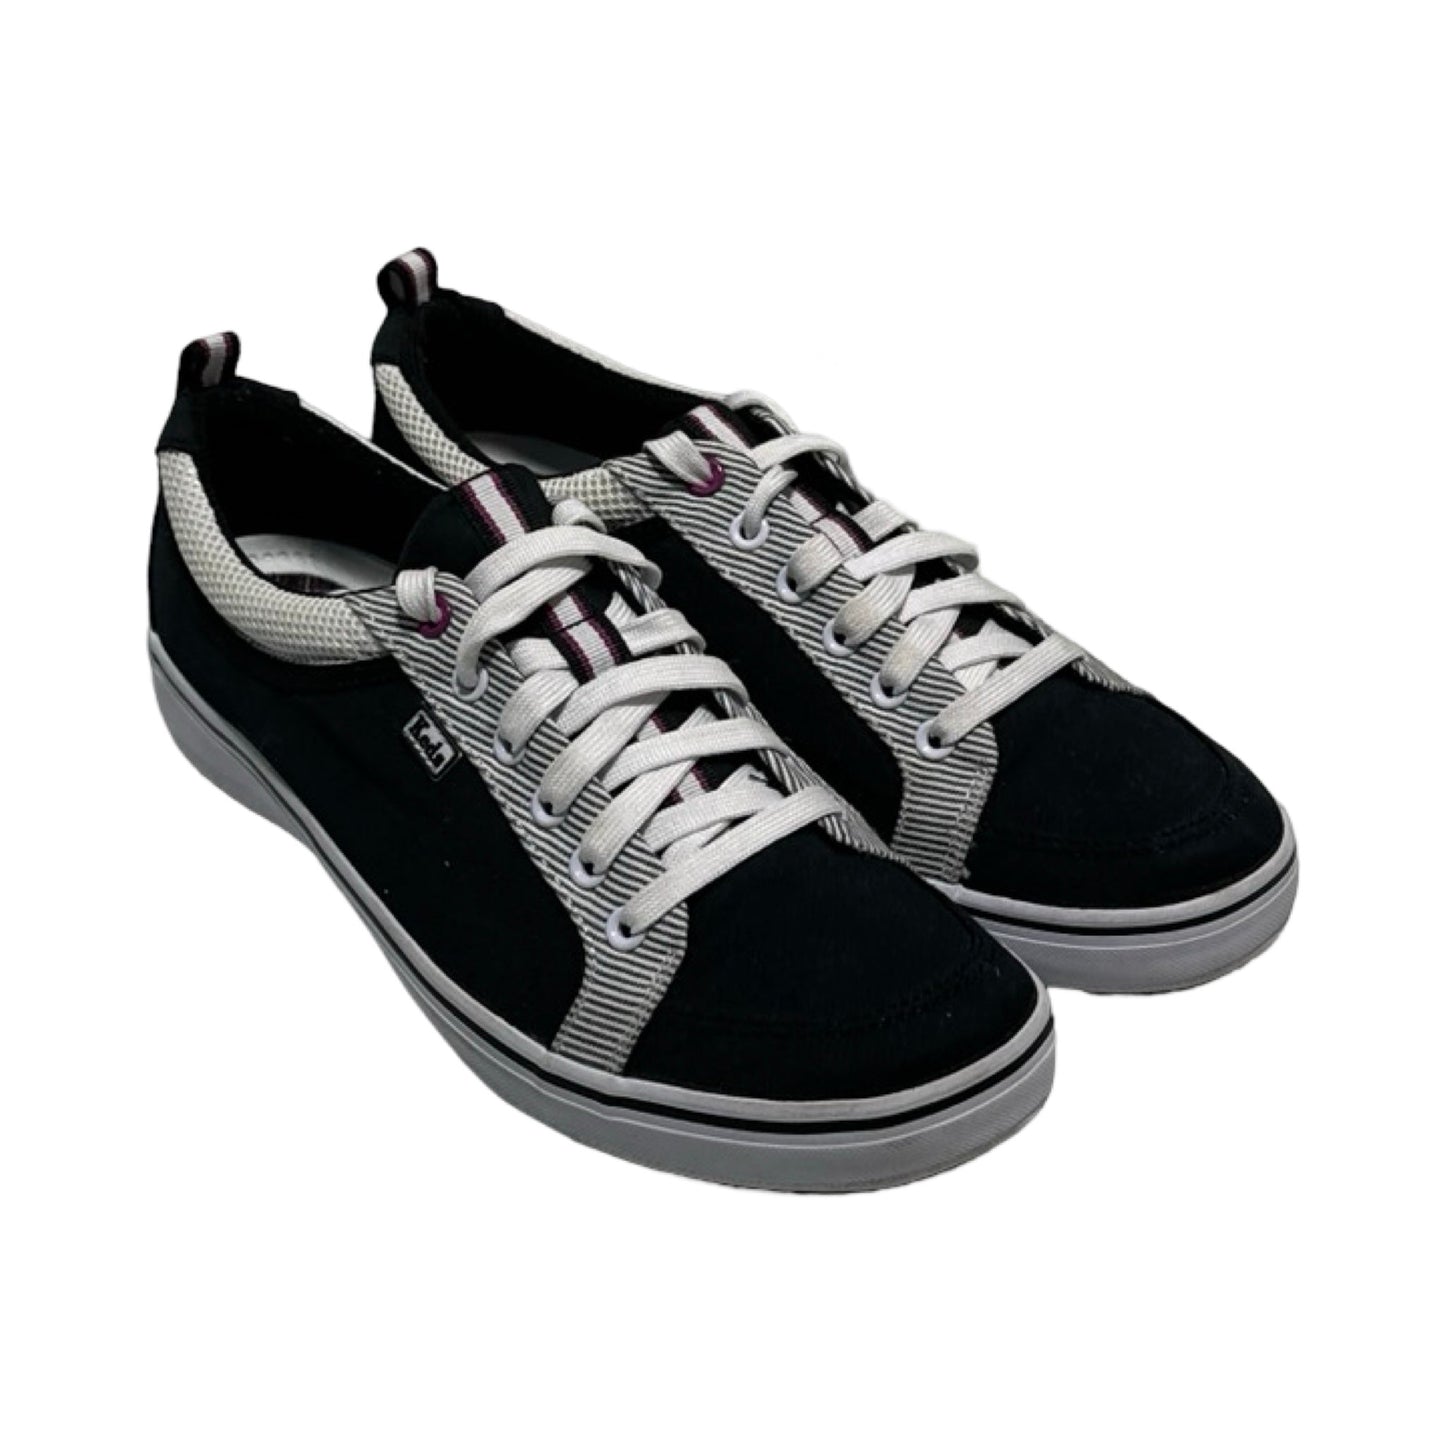 Black & White Shoes Sneakers Keds, Size 9